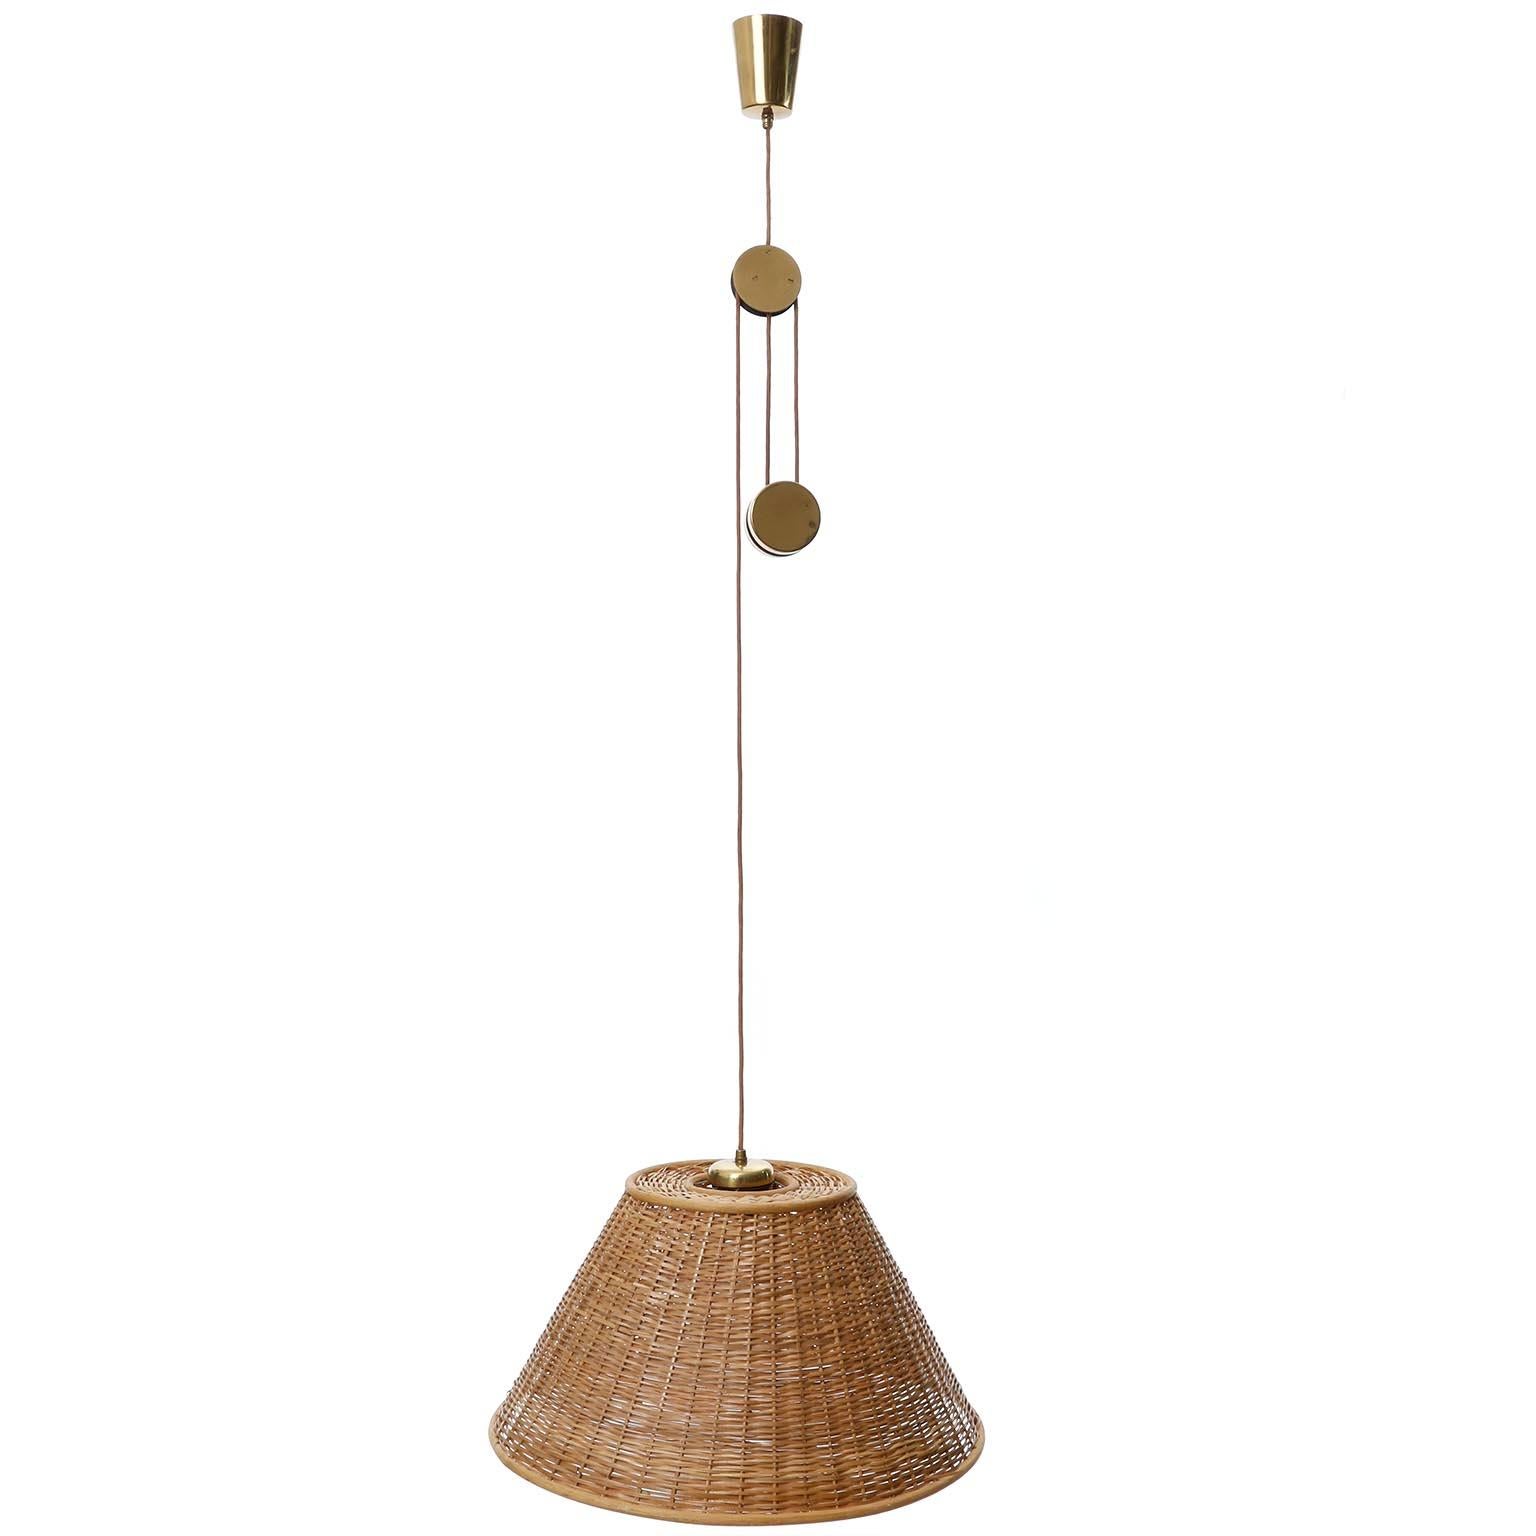 A rare and fantastic height adjustable brass counter balance pendant lamp with wicker lampshade model 'Jo-Jo Zug' no. 2505 by J.T. Kalmar manufactured in midcentury in 1950s.
The light is based on a design by Josef Frank from the 1930s. In the